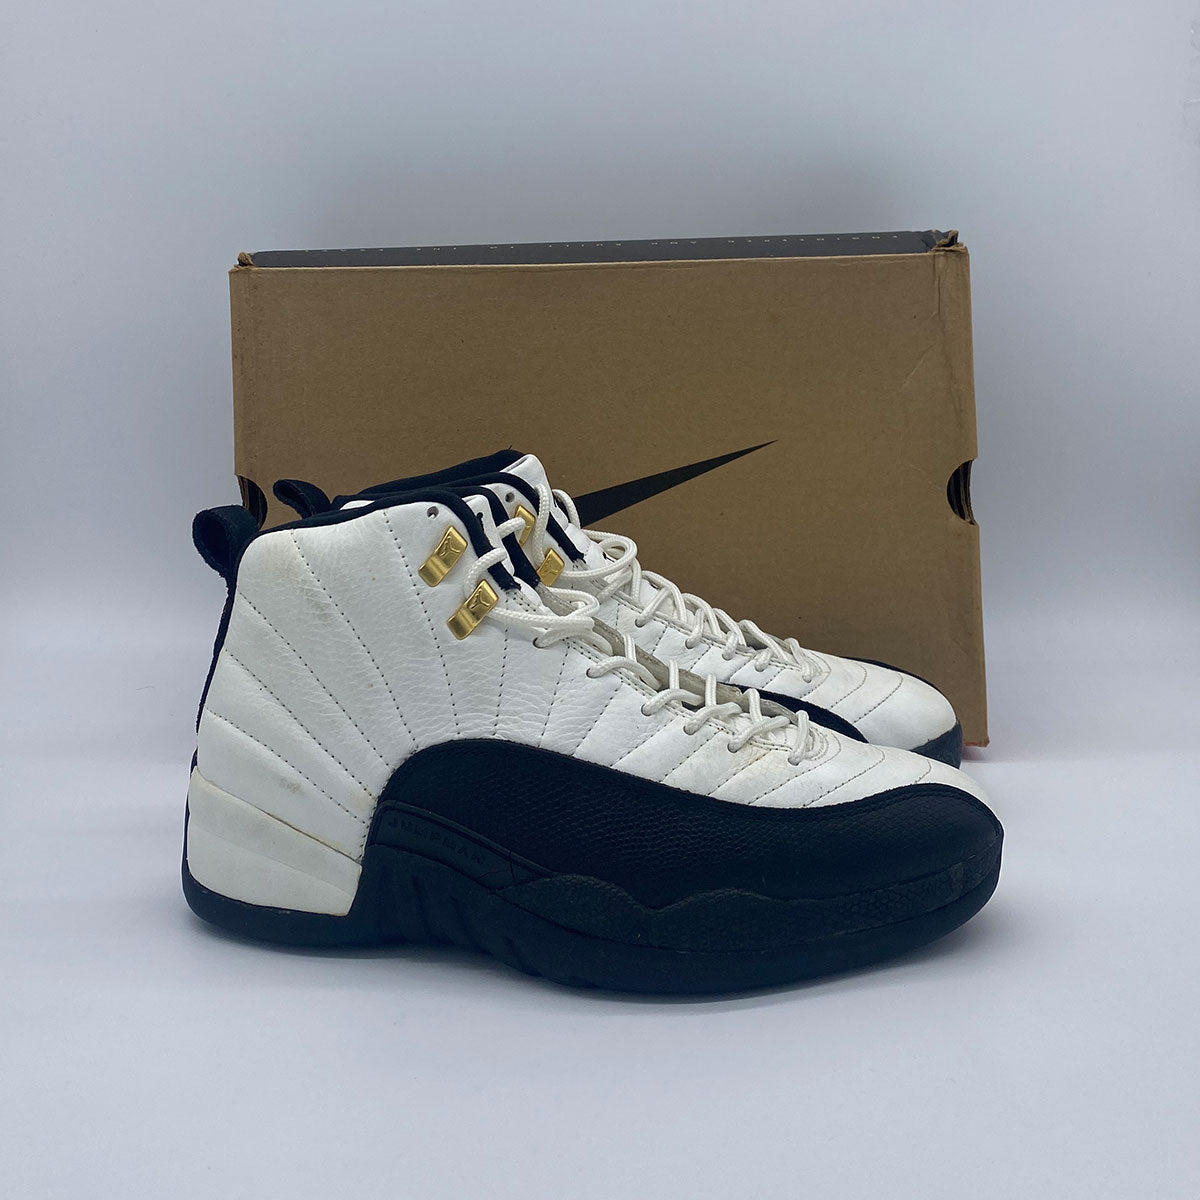 Air Jordan 12 XII OG Taxi 1996 Release size 9.5 VNDS (Pre-Owned) - KickzStore